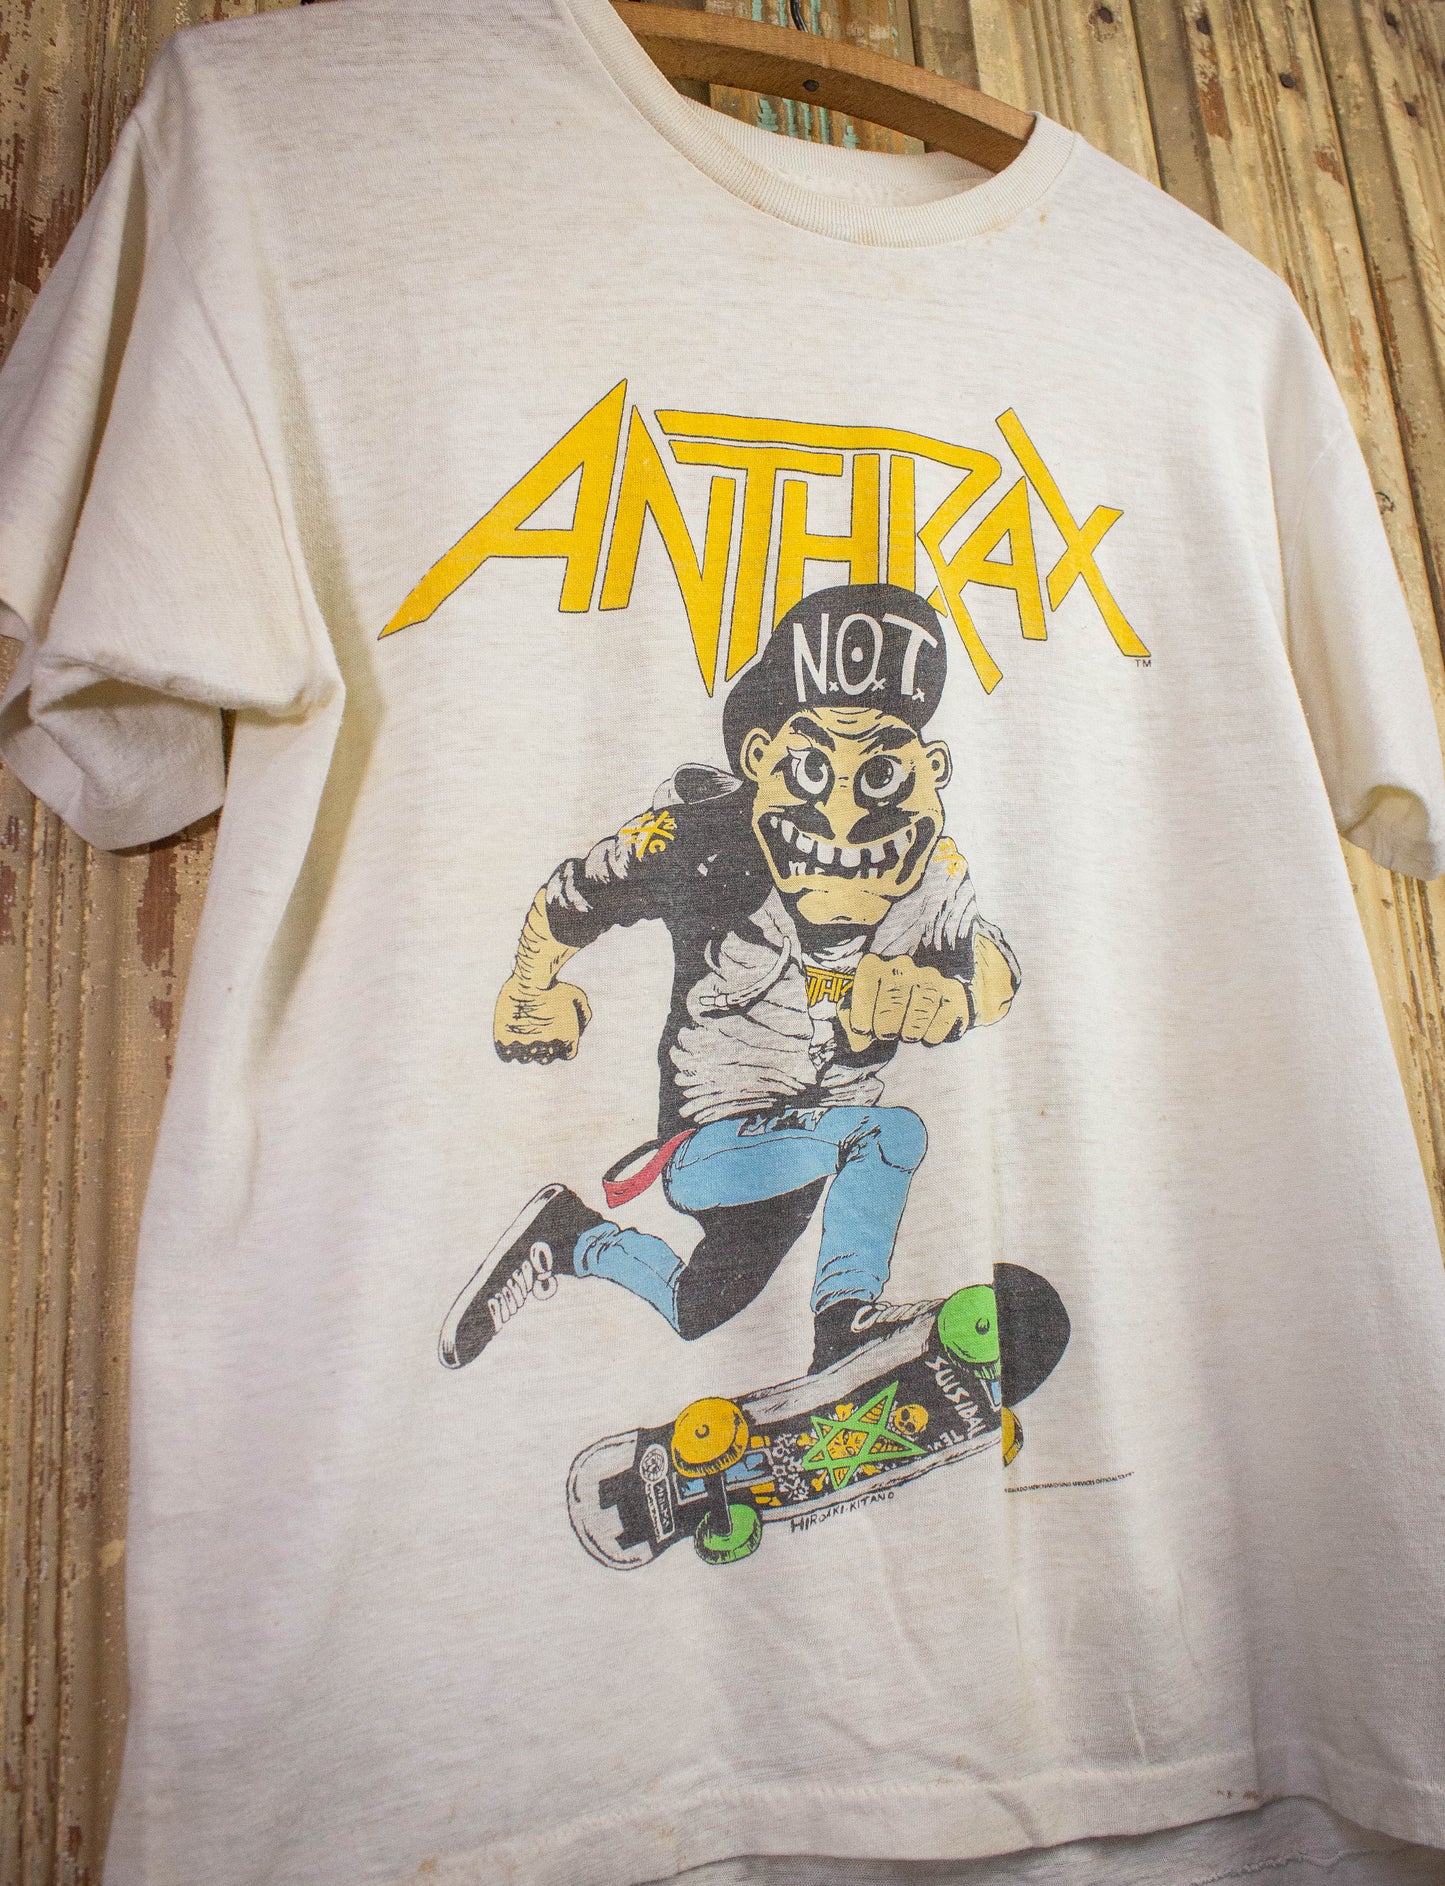 Vintage Anthrax Mosh It Up Concert T Shirt 1987 White Small